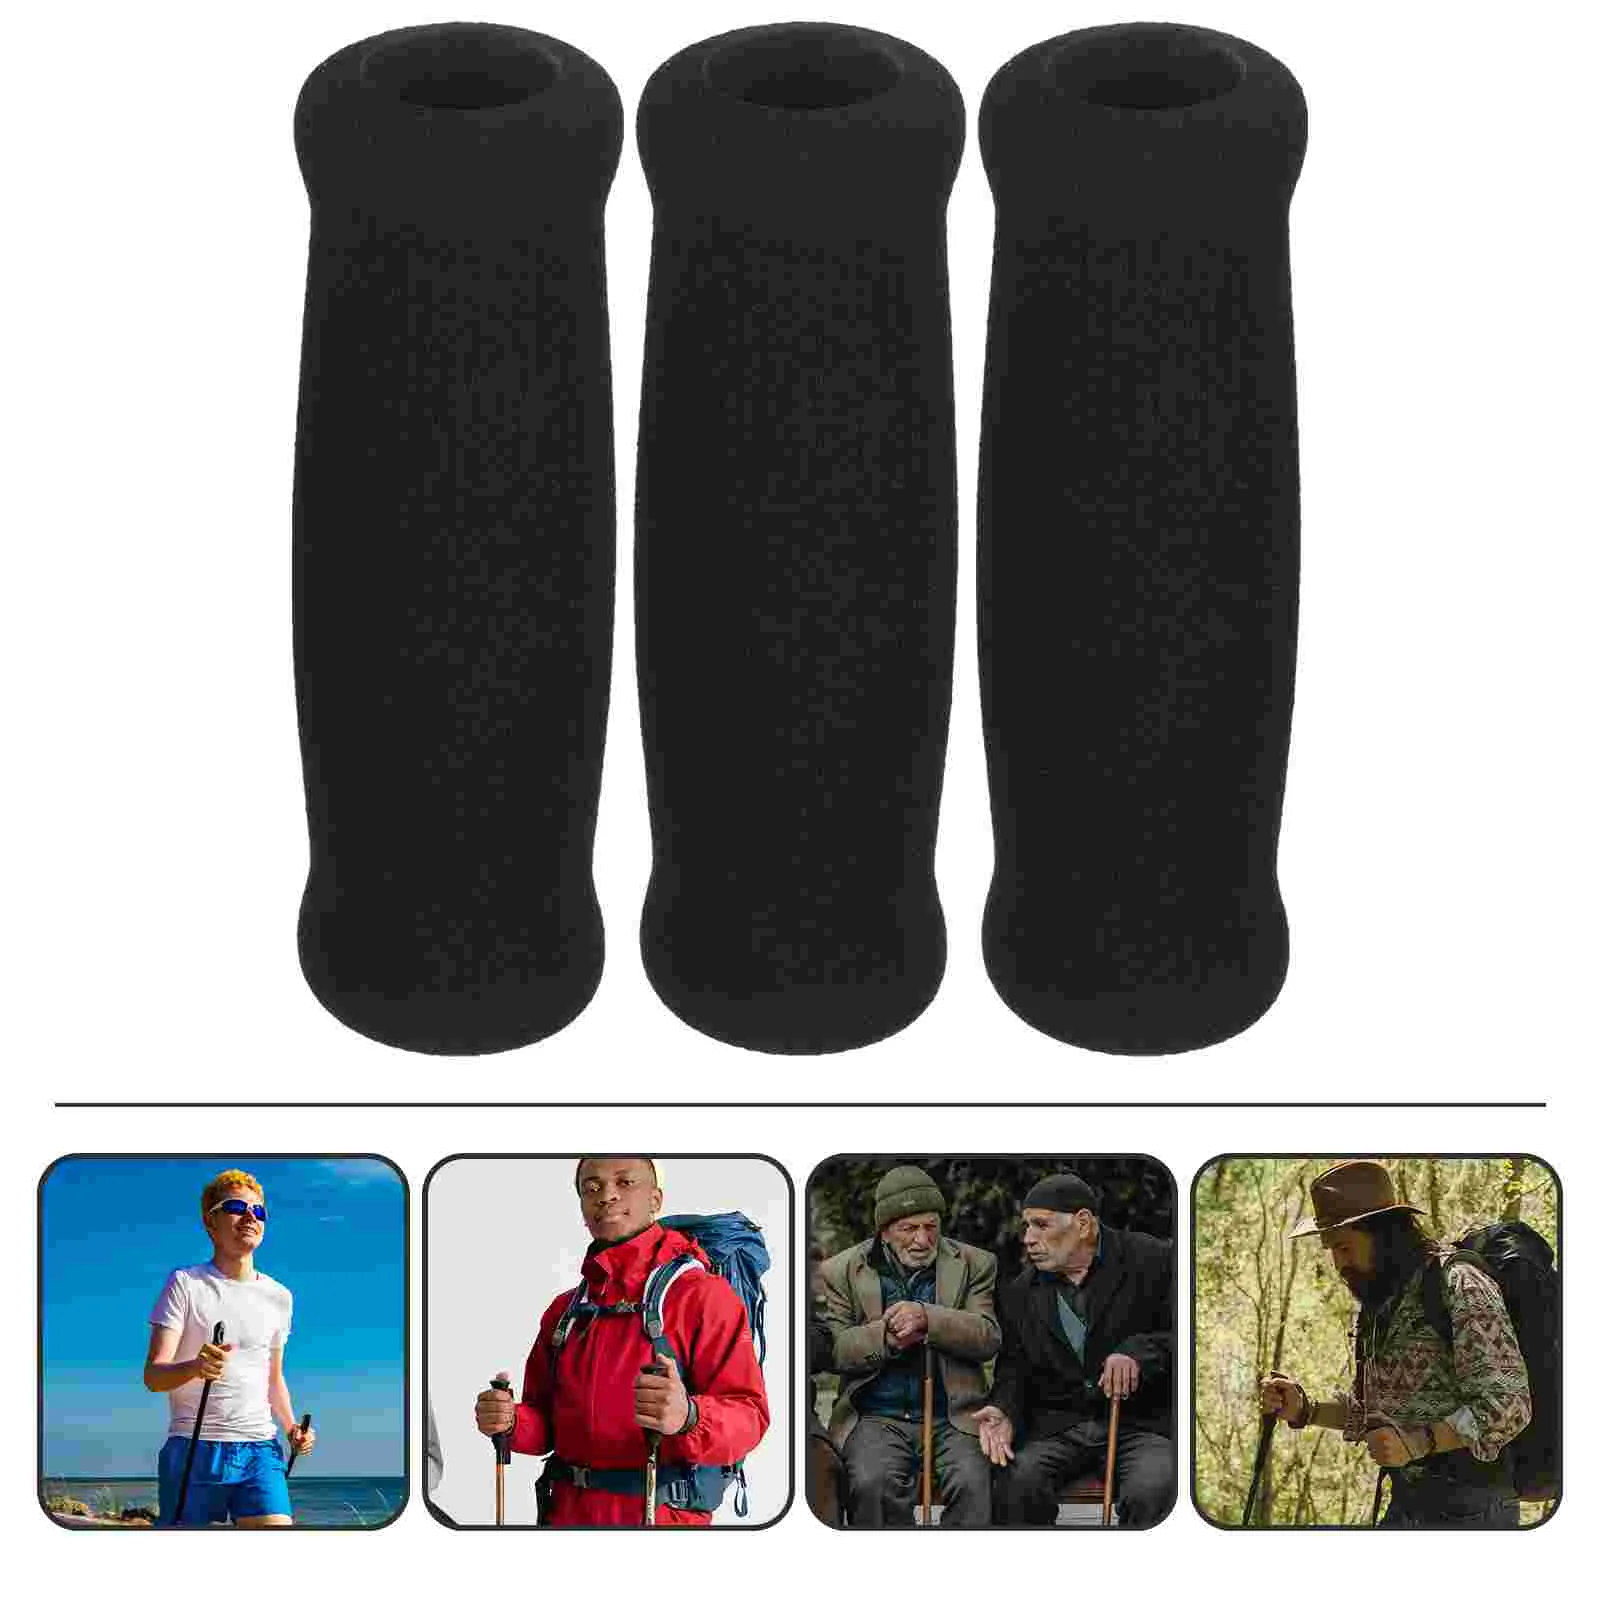 

Cane Grip Replacement Offset Crutch Hand Grip Medical Drive Cane Crutch Handgrips Universal Cane Padding Handle Covers